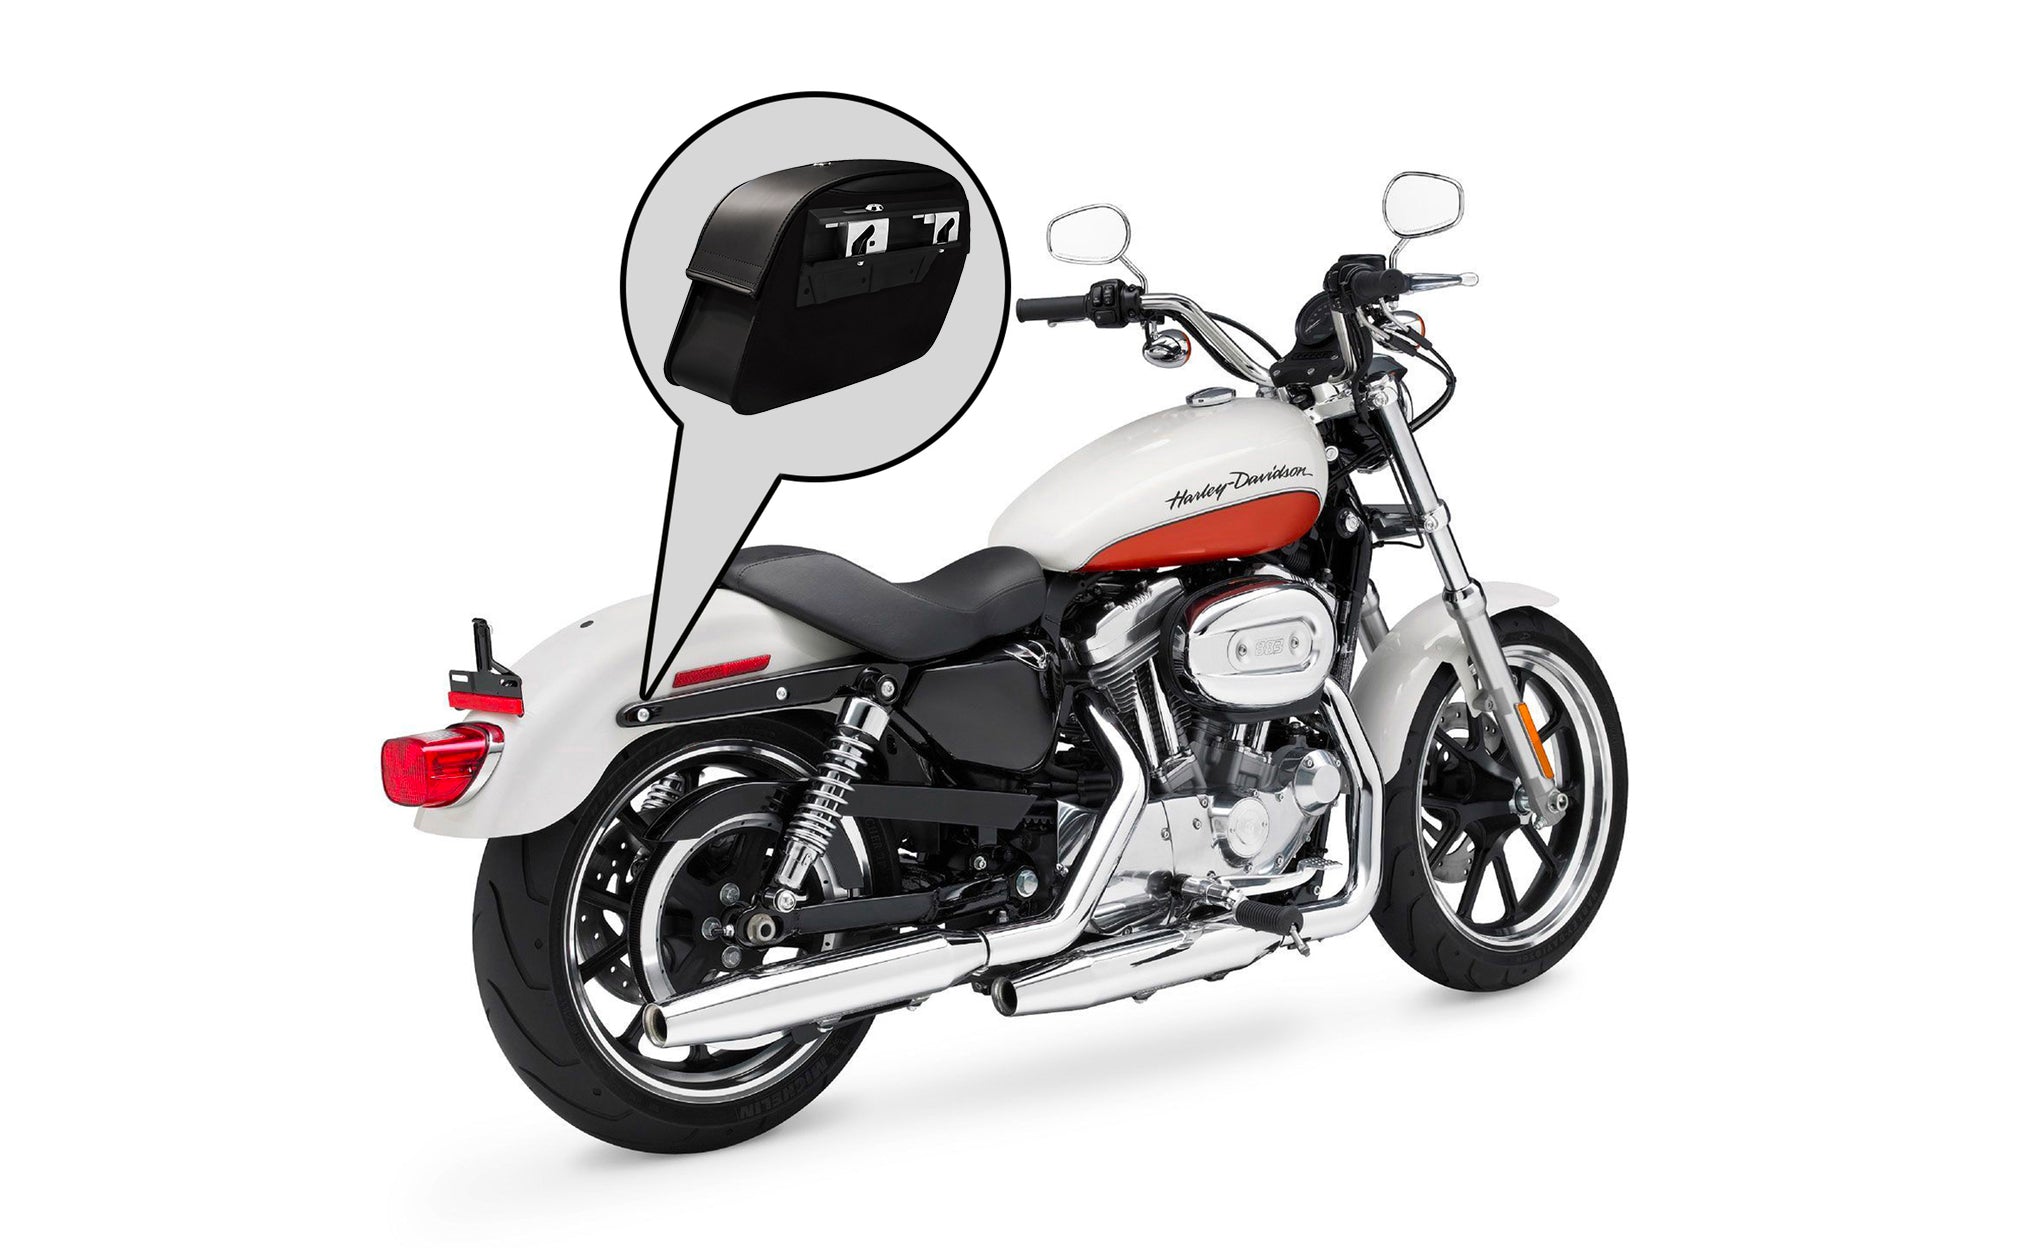 Viking Saddlebags Quick Disconnect System For Honda Valkyrie @expand